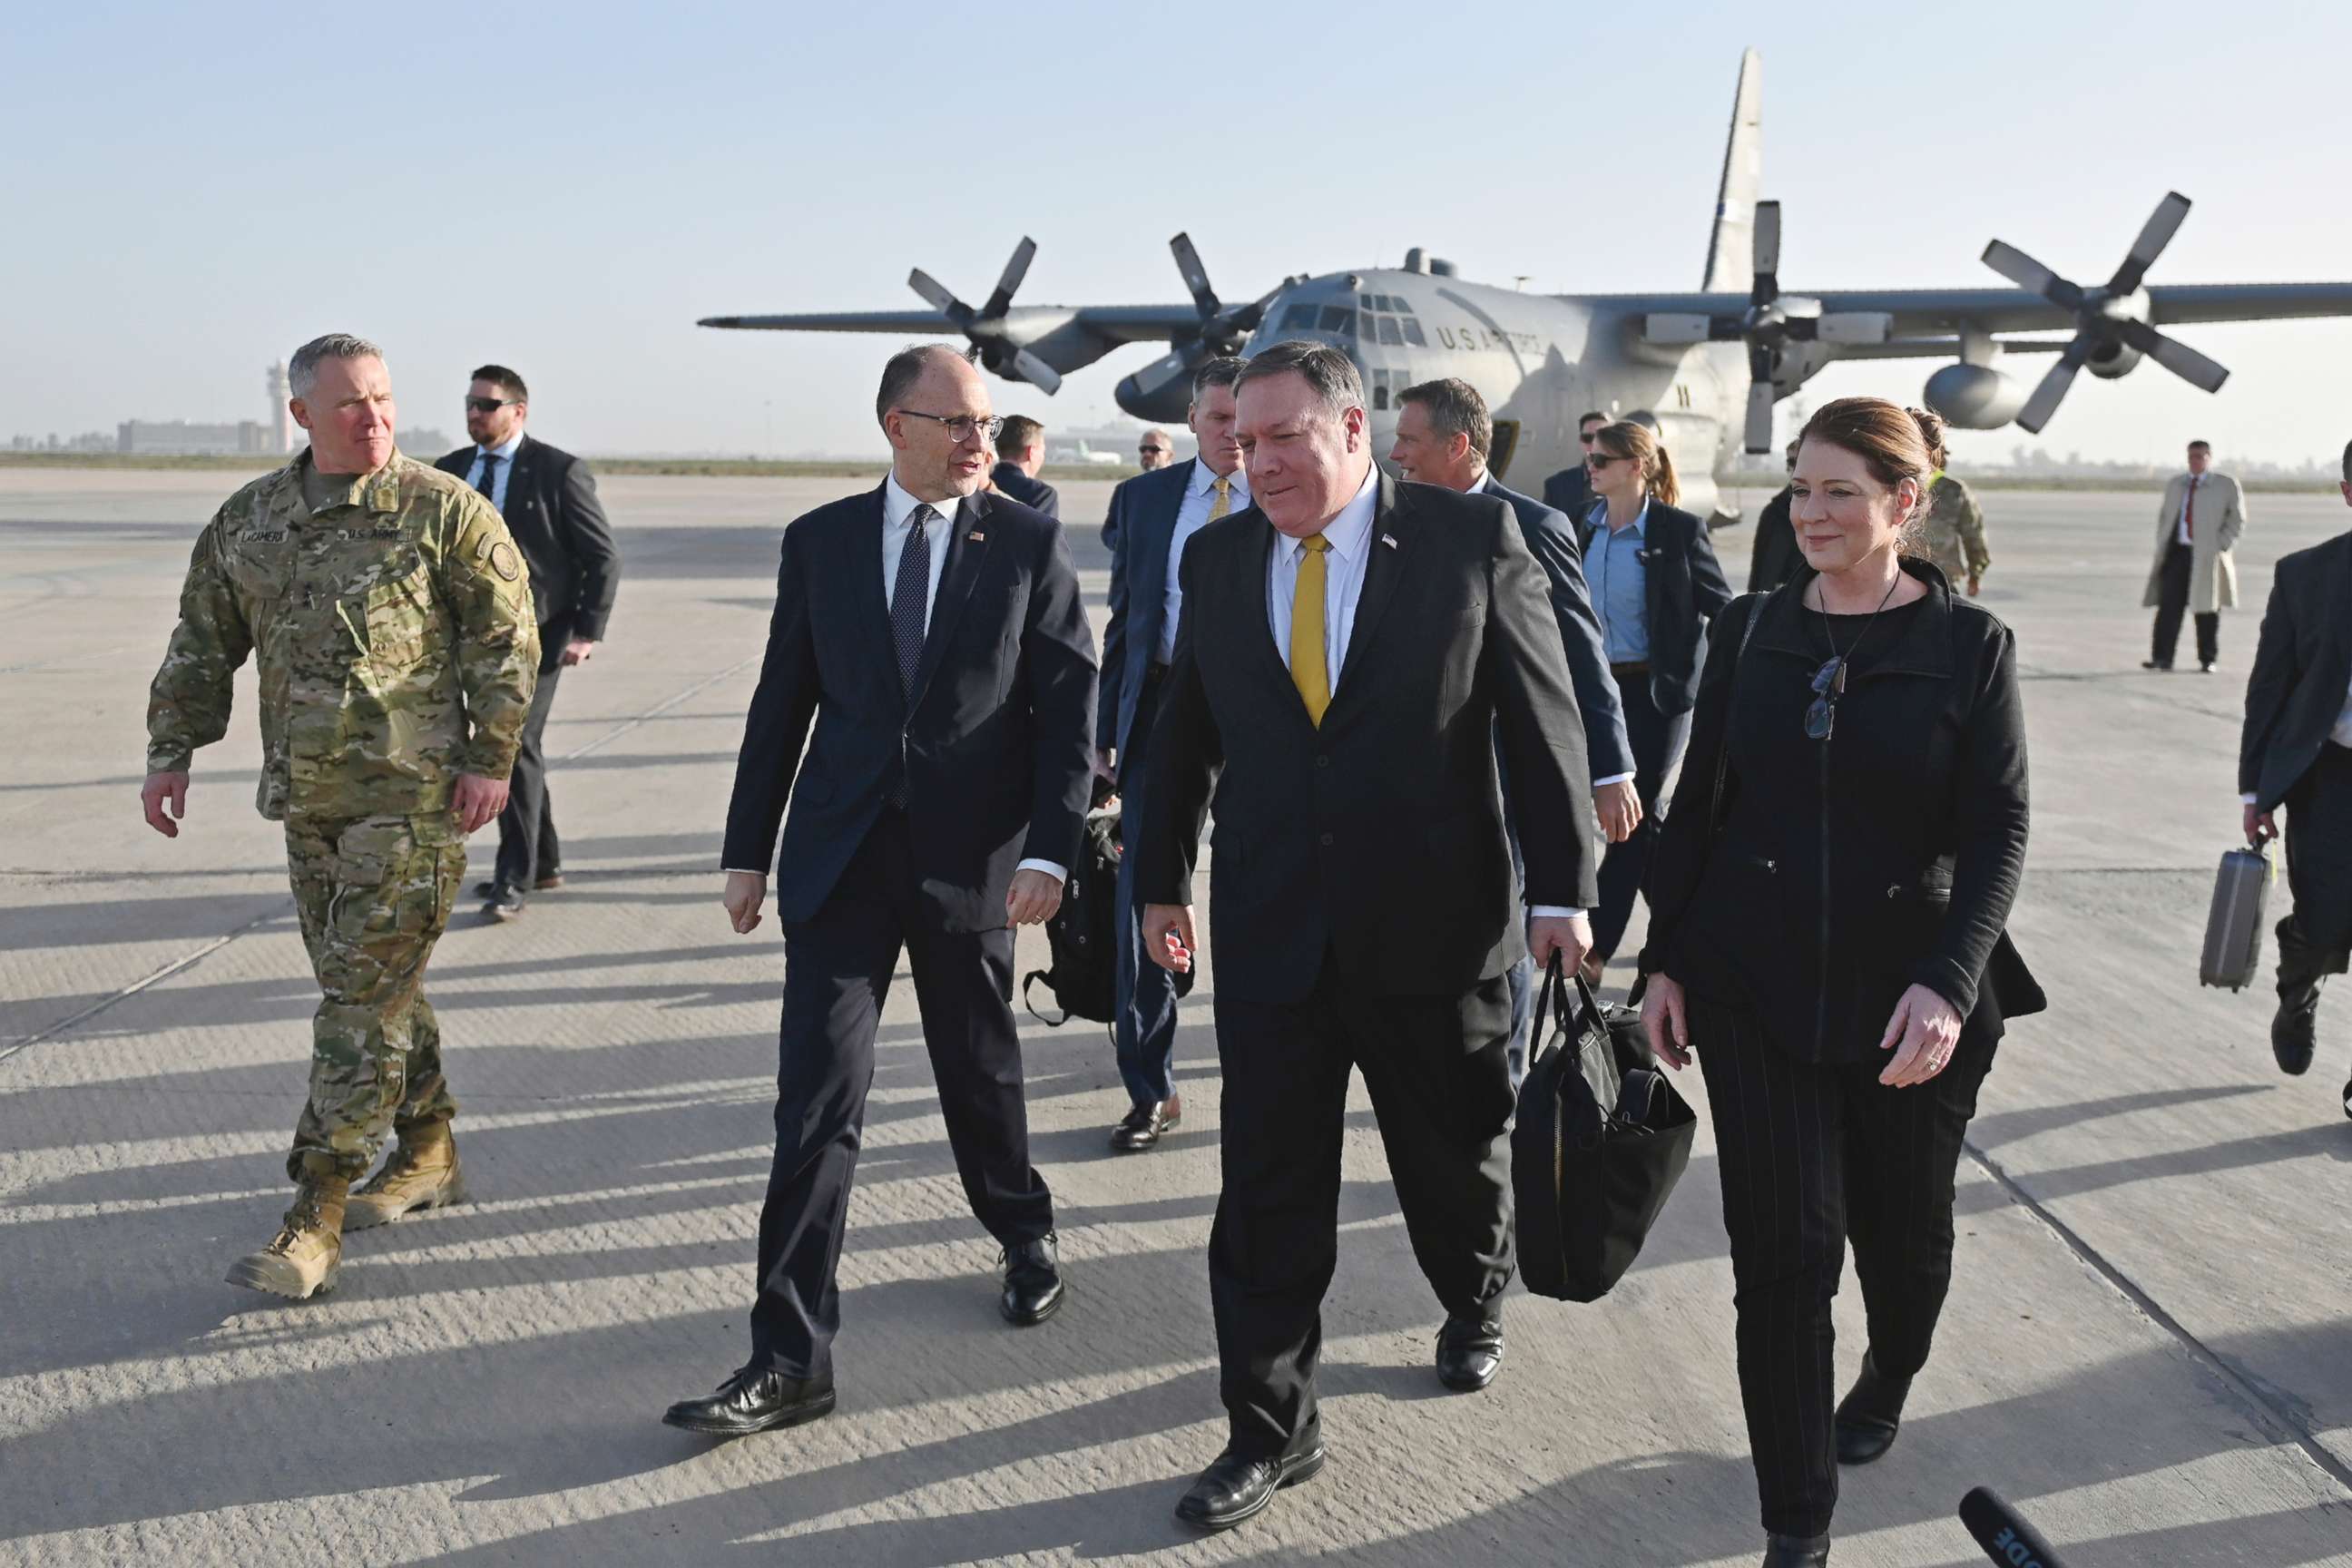 PHOTO: Secretary of State Mike Pompeo, second right, and his wife Susan, right, is welcomed by U.S. ambassador to Iraq Douglas Silliman, second left, as they arrive in Baghdad, Iraq, during a Middle East tour, Jan. 9, 2019.